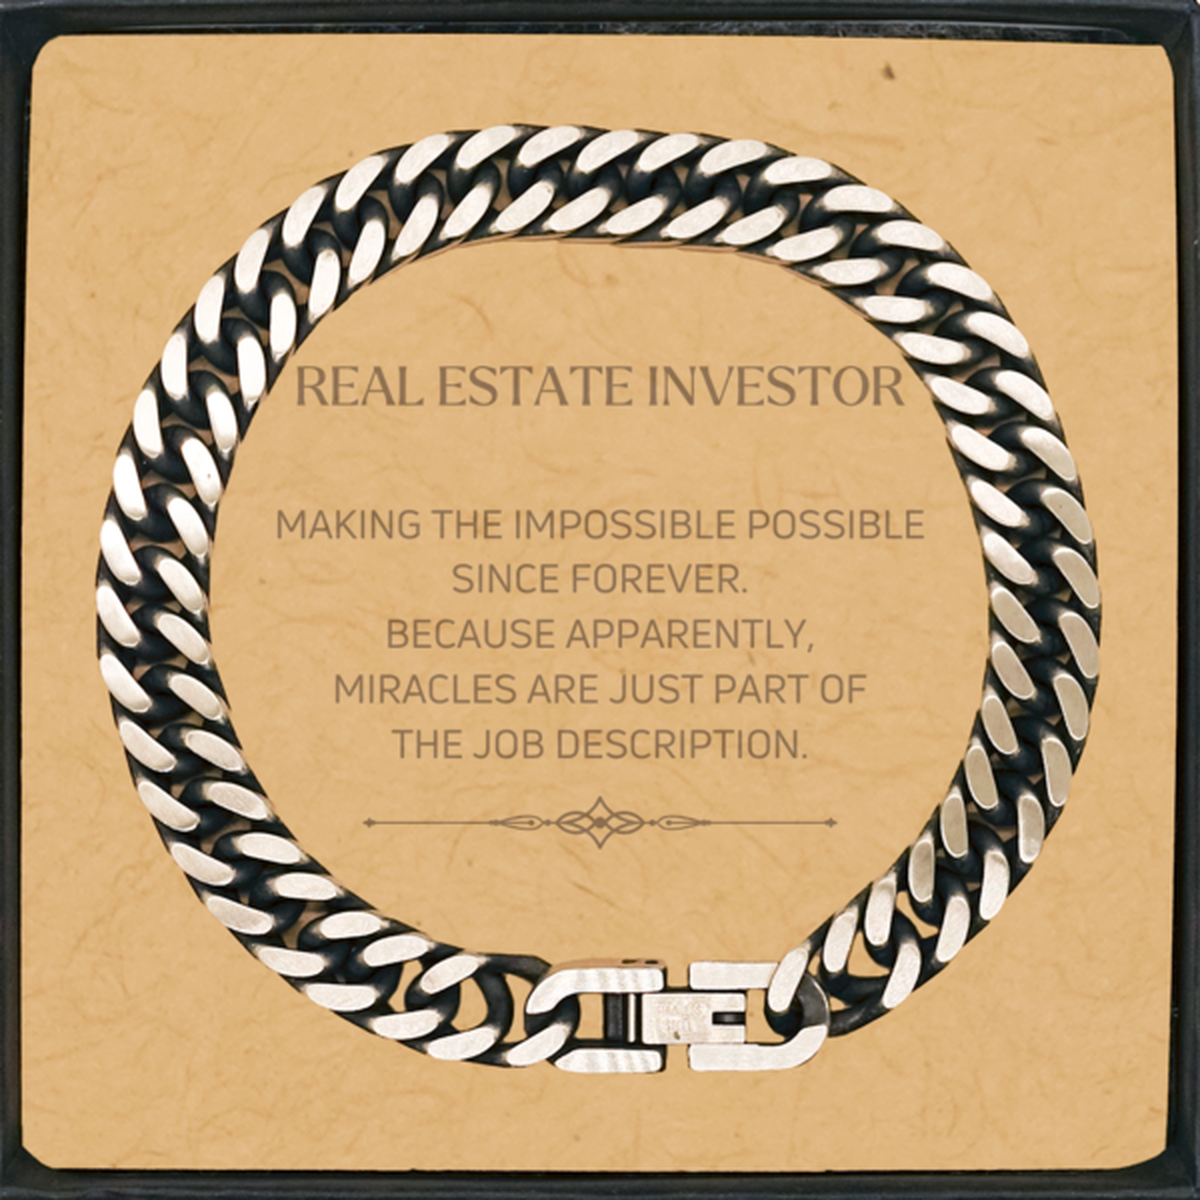 Funny Real Estate Investor Gifts, Miracles are just part of the job description, Inspirational Birthday Cuban Link Chain Bracelet For Real Estate Investor, Men, Women, Coworkers, Friends, Boss